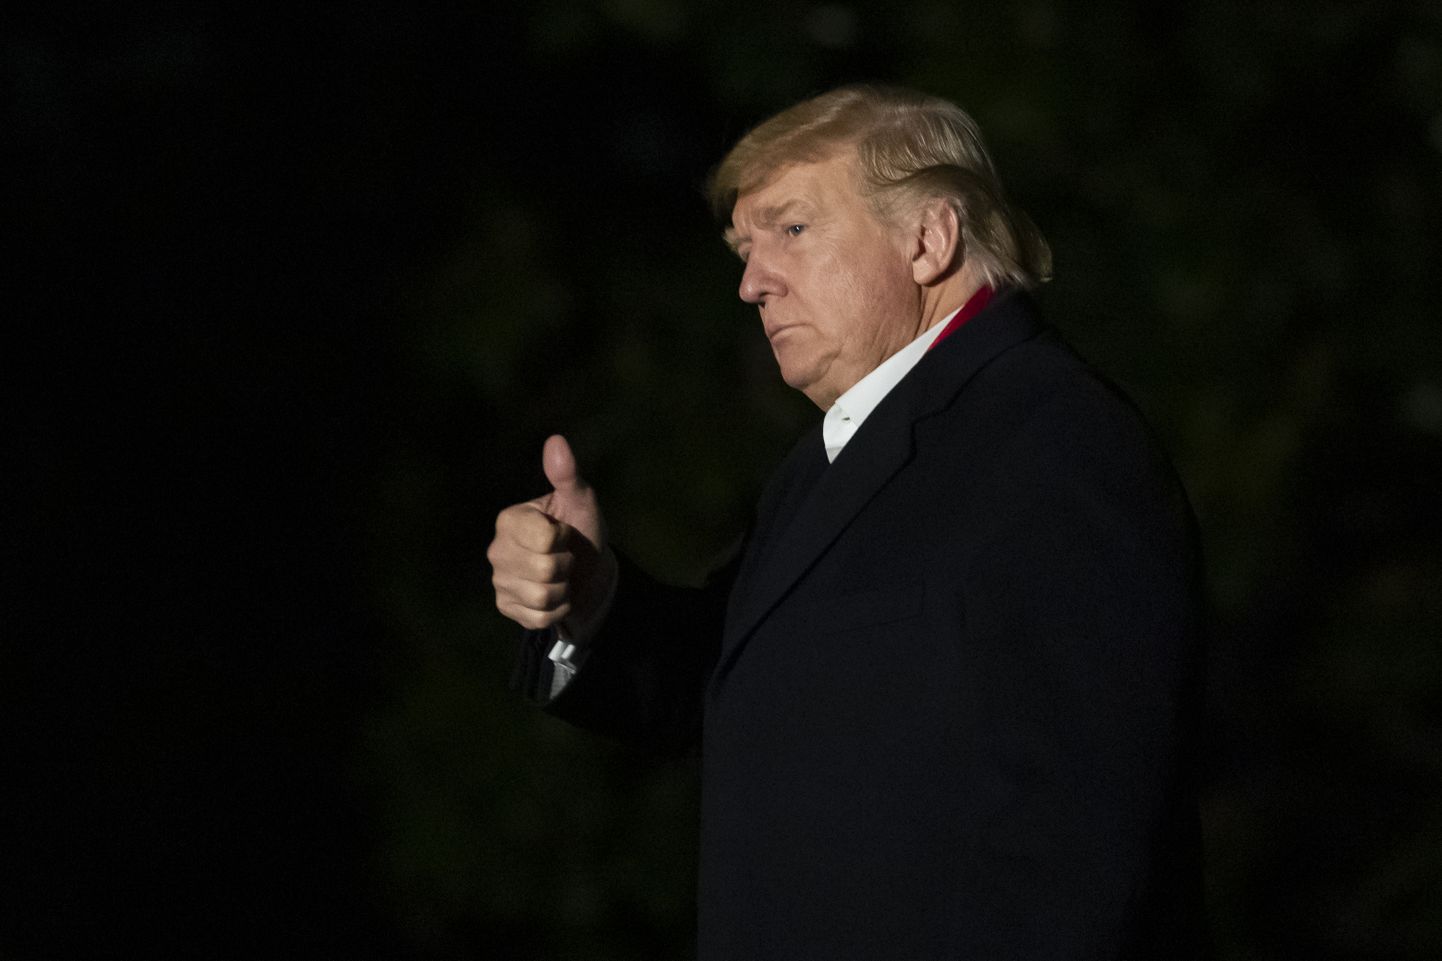 President Donald Trump gives a thumbs-up while walking on the South Lawn as he returns to the White House, early Friday, Jan. 31, 2020, in Washington. Trump returned from trips to Michigan and Iowa. (AP Photo/Alex Brandon)